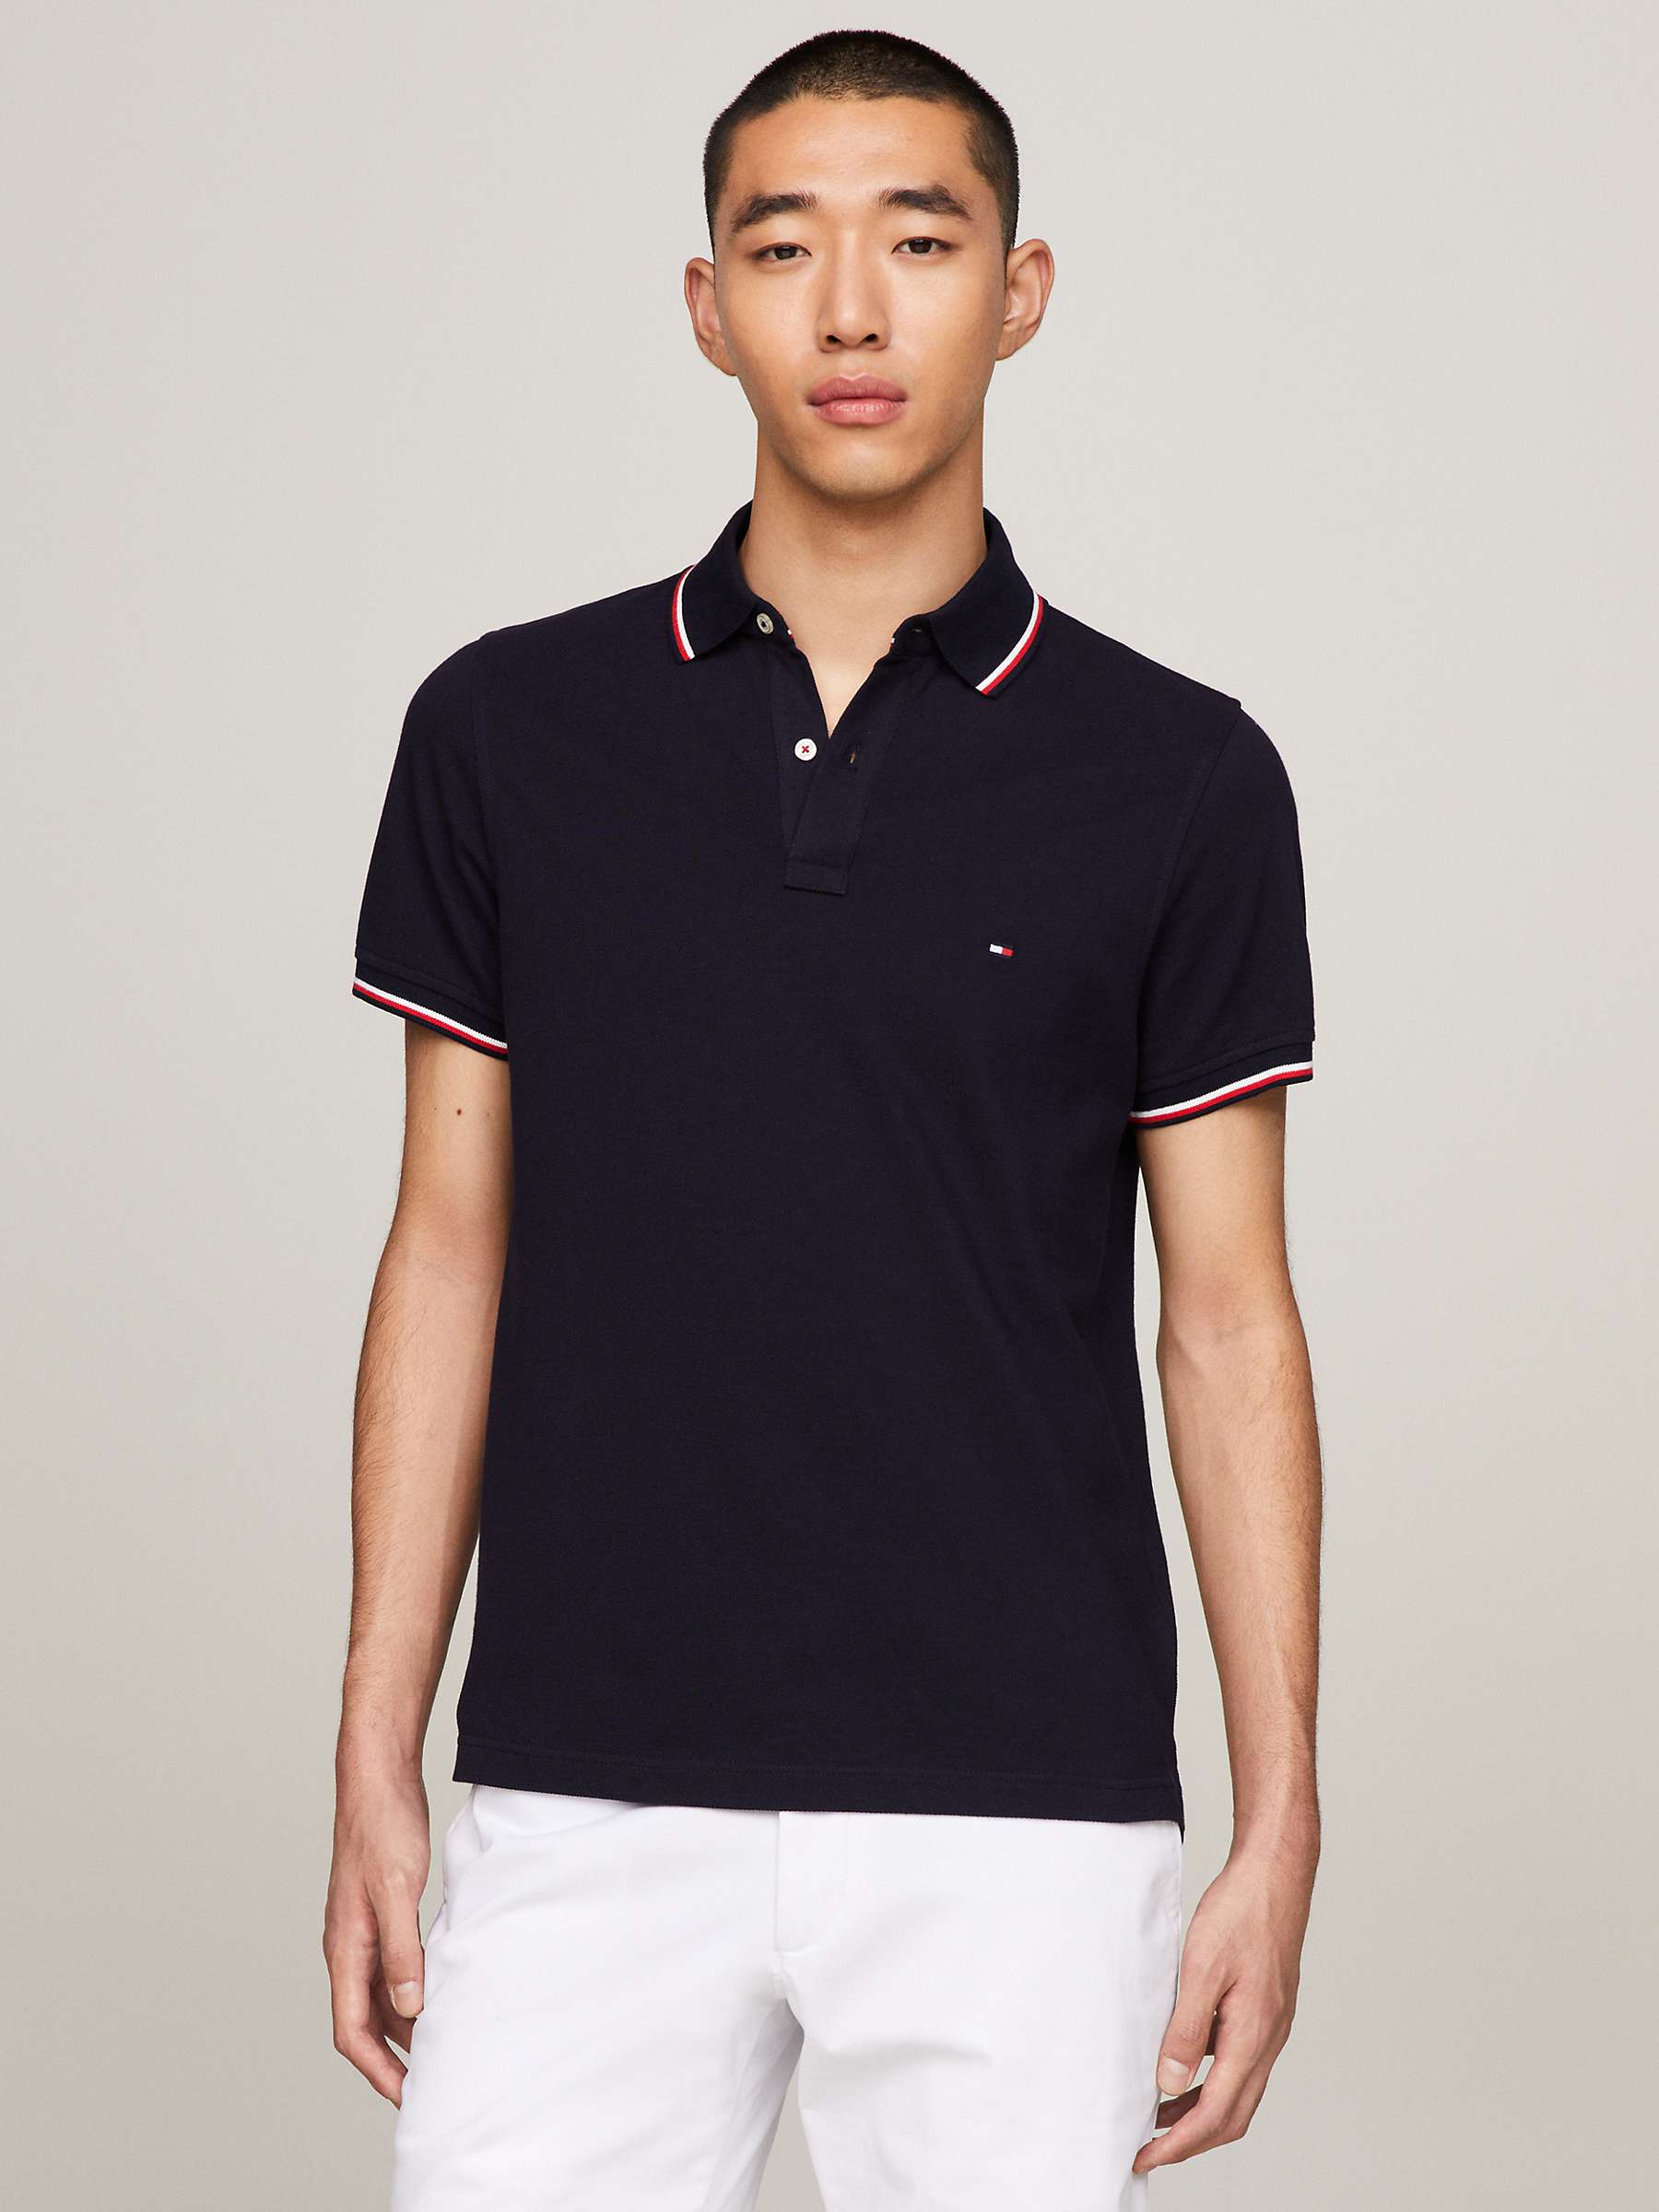 Tommy Hilfiger Tipped Organic Cotton Slim Fit Polo Shirt, Desert Sky at ...